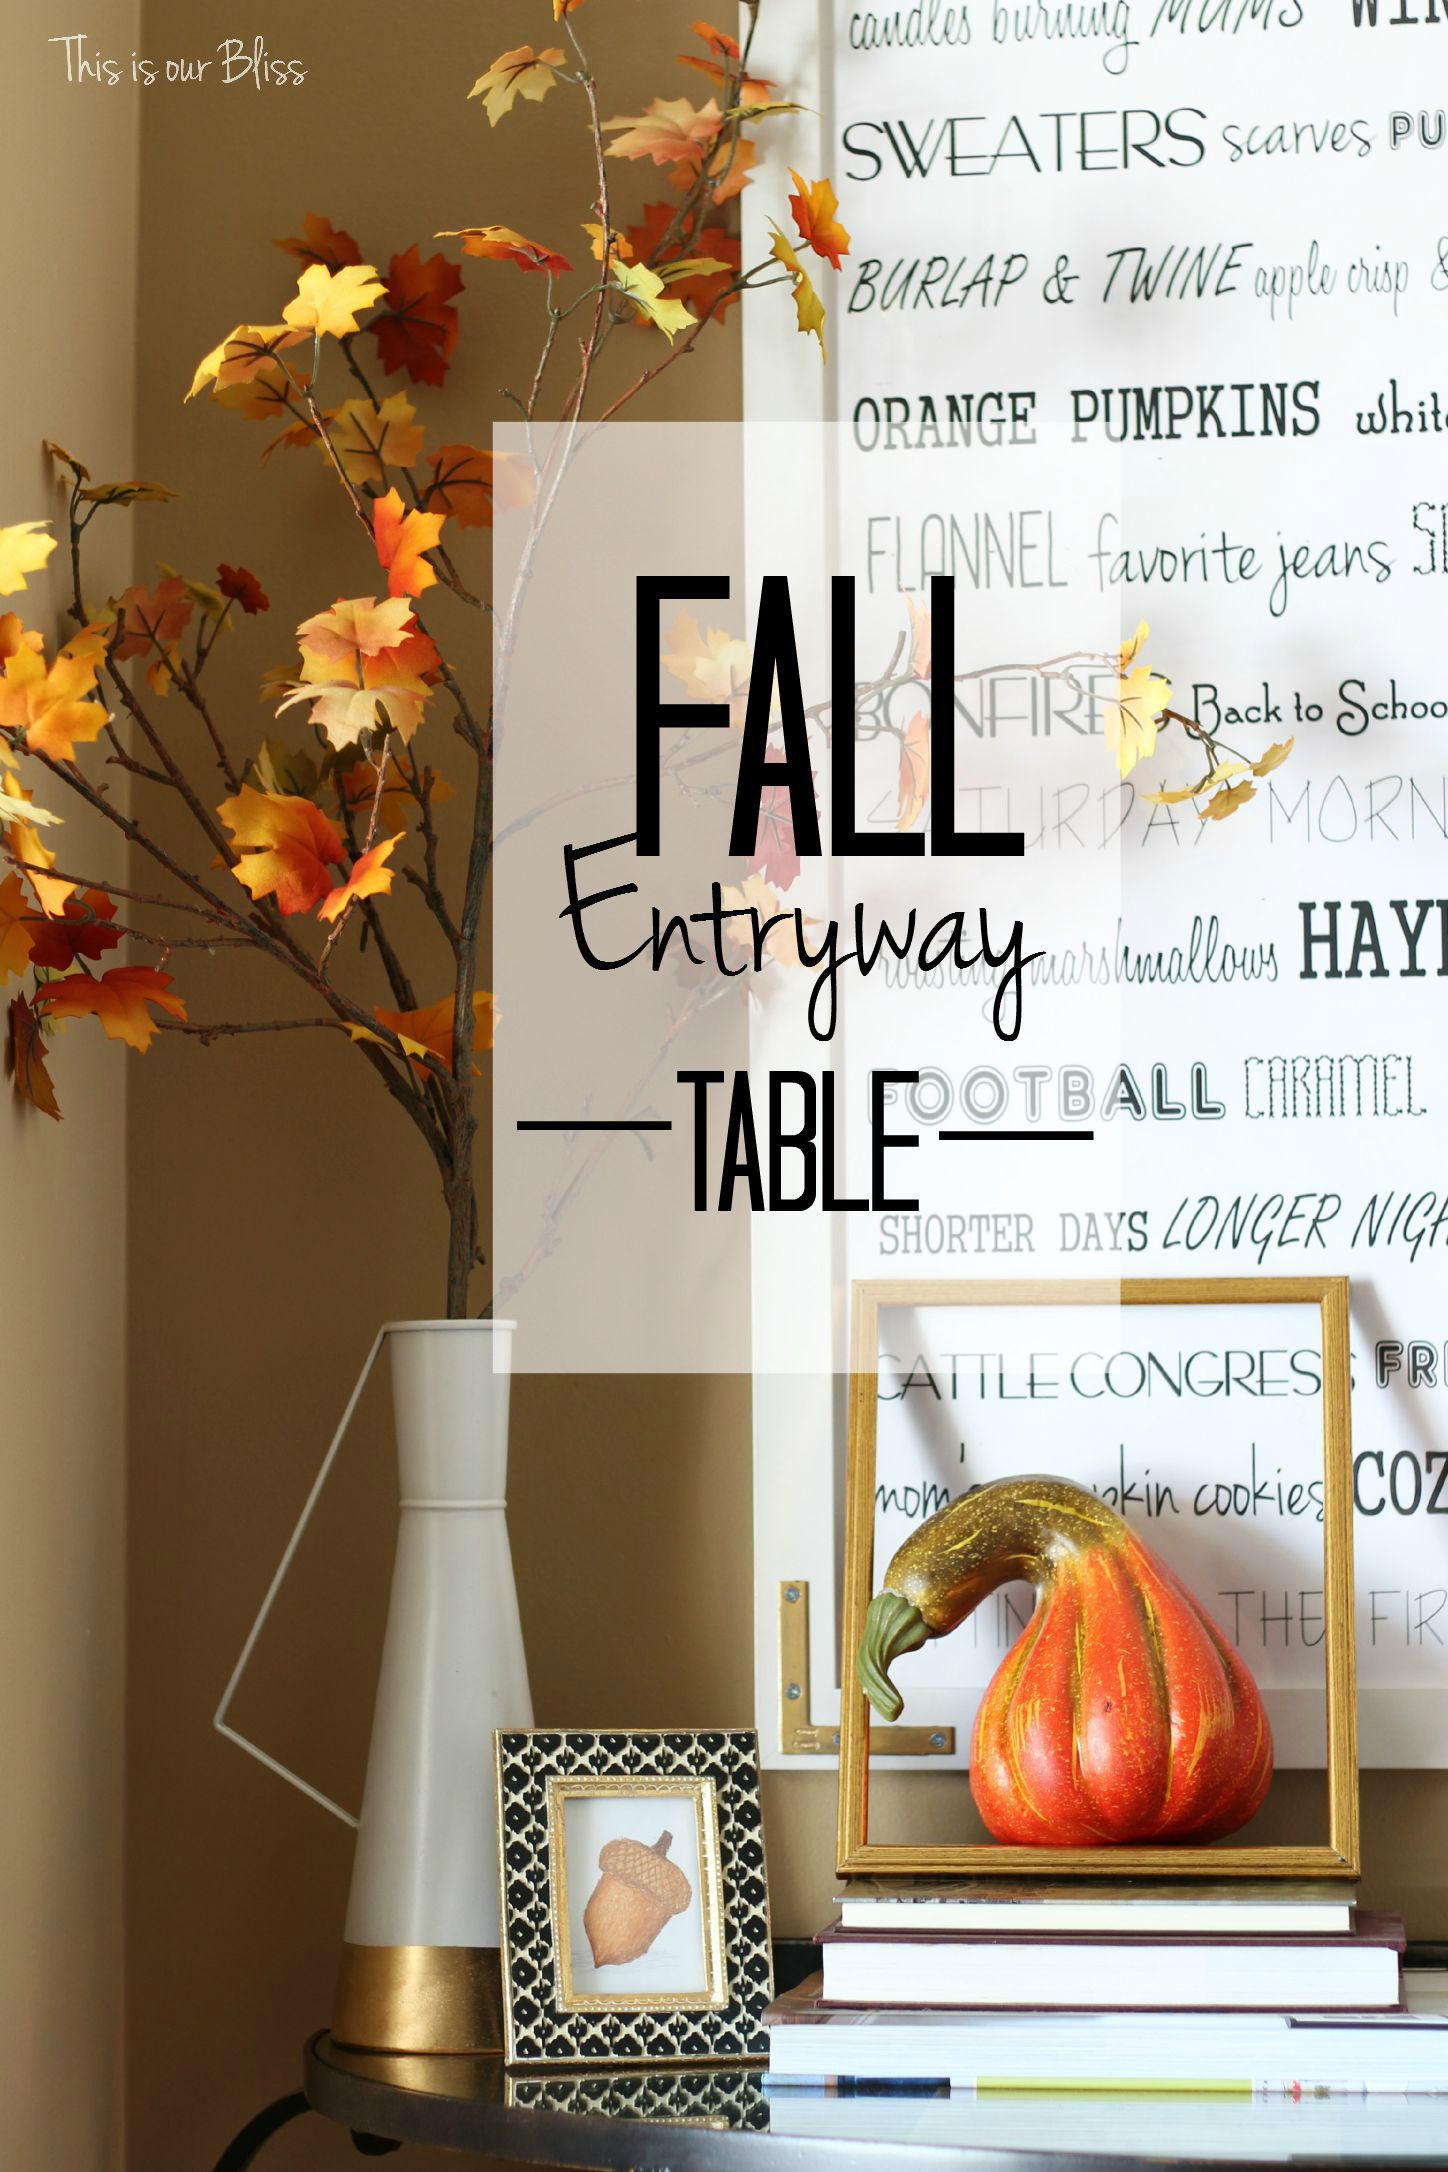 Fall entryway - fall vignette - fall entryway table styling - fall decor - neutral fall decor - DIY fall word art - leaves - open frame - This is our Bliss